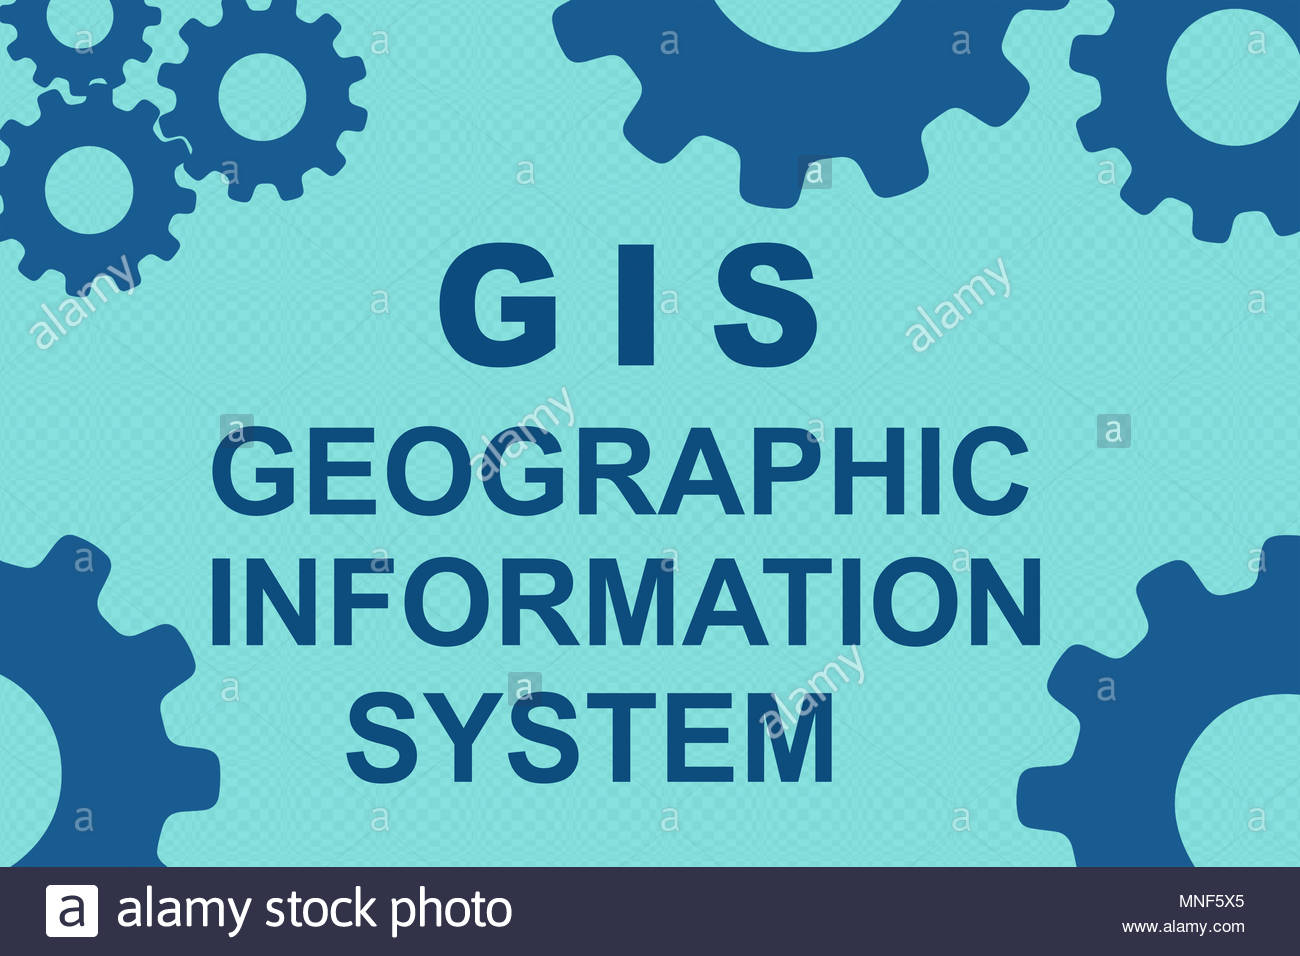 Gis Geographic Information System Sign Concept Illustration With